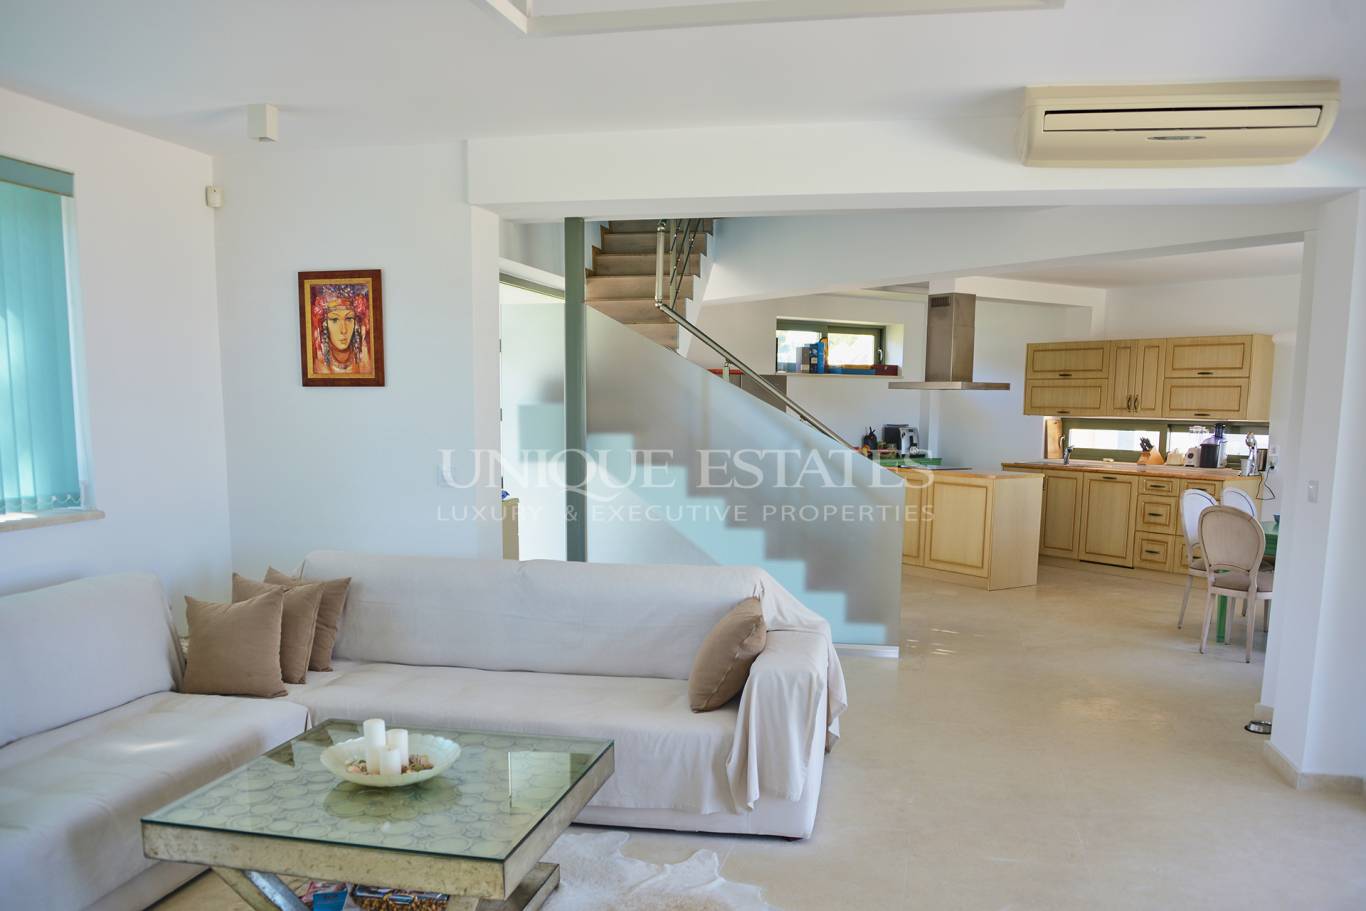 House for sale in Chalkidiki,  with listing ID: K14176 - image 6